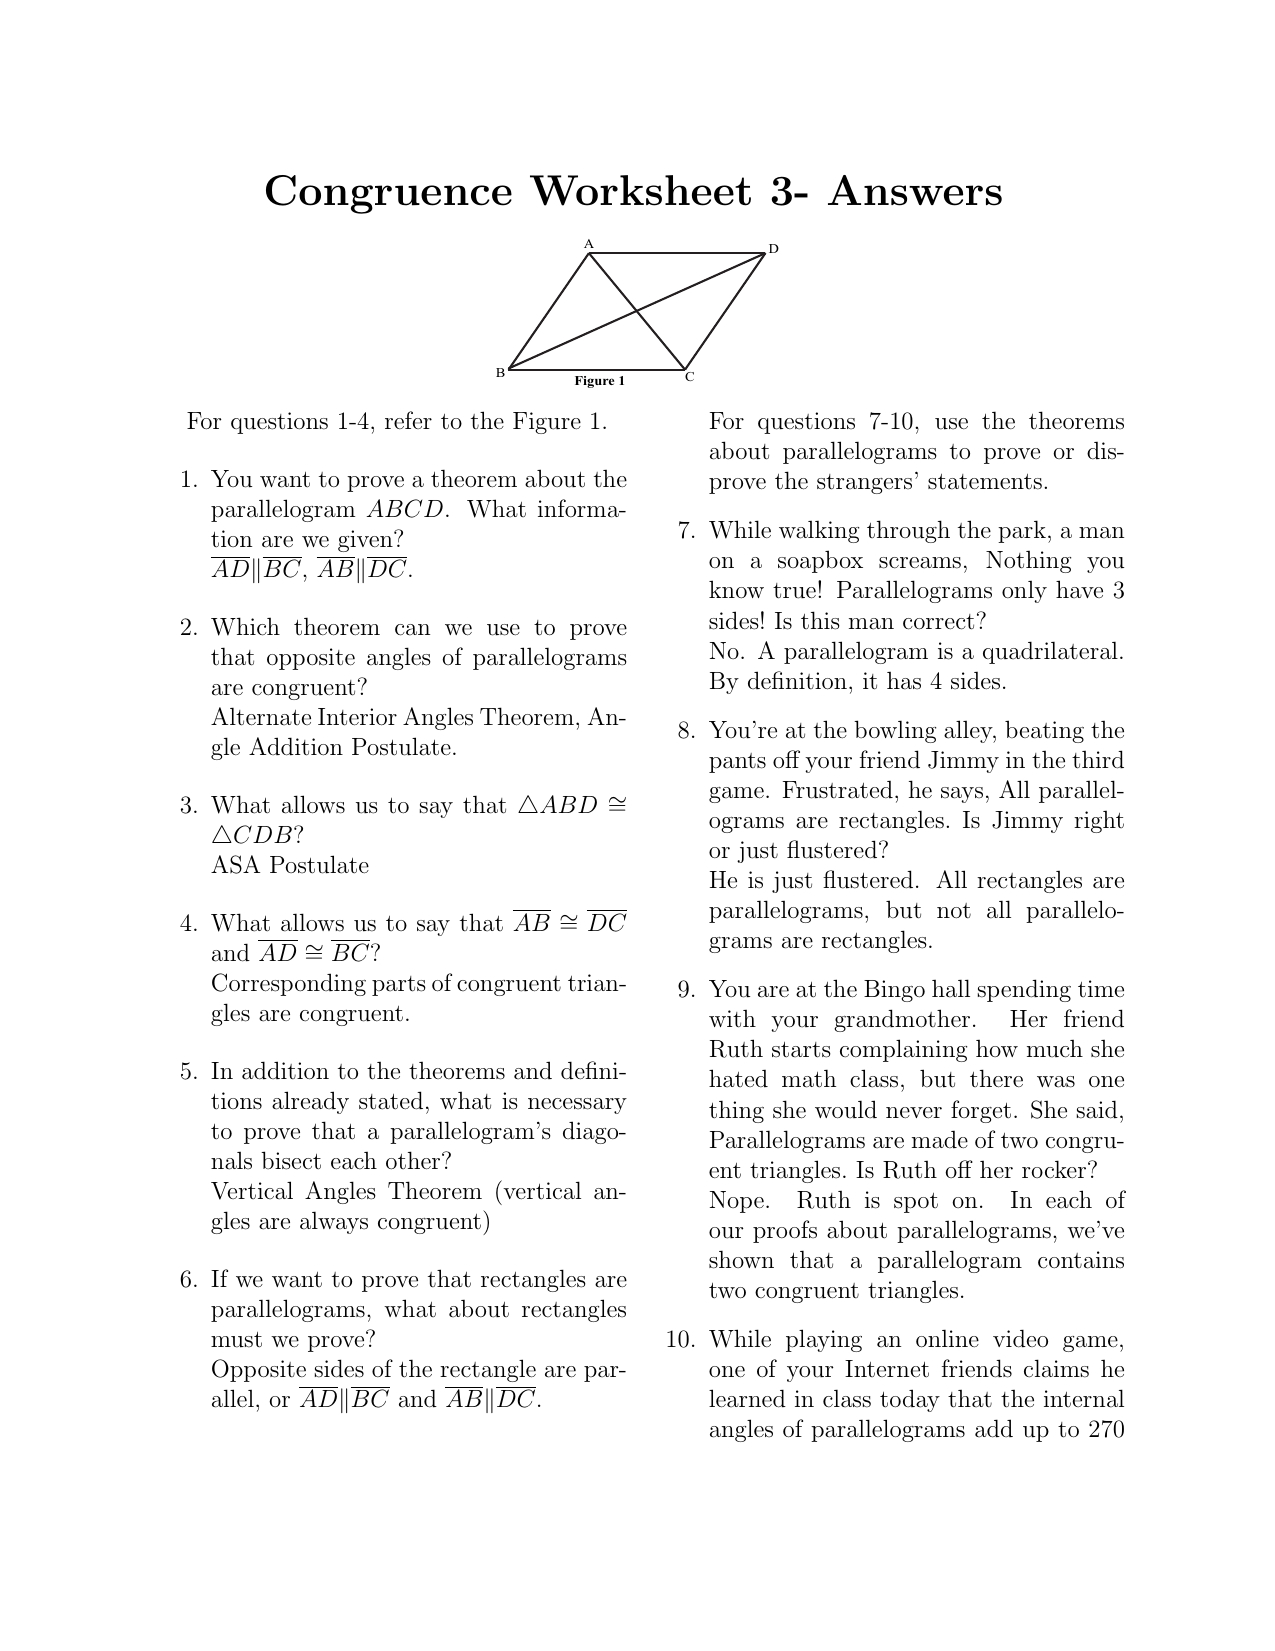 Congruence Worksheet 3 Answers